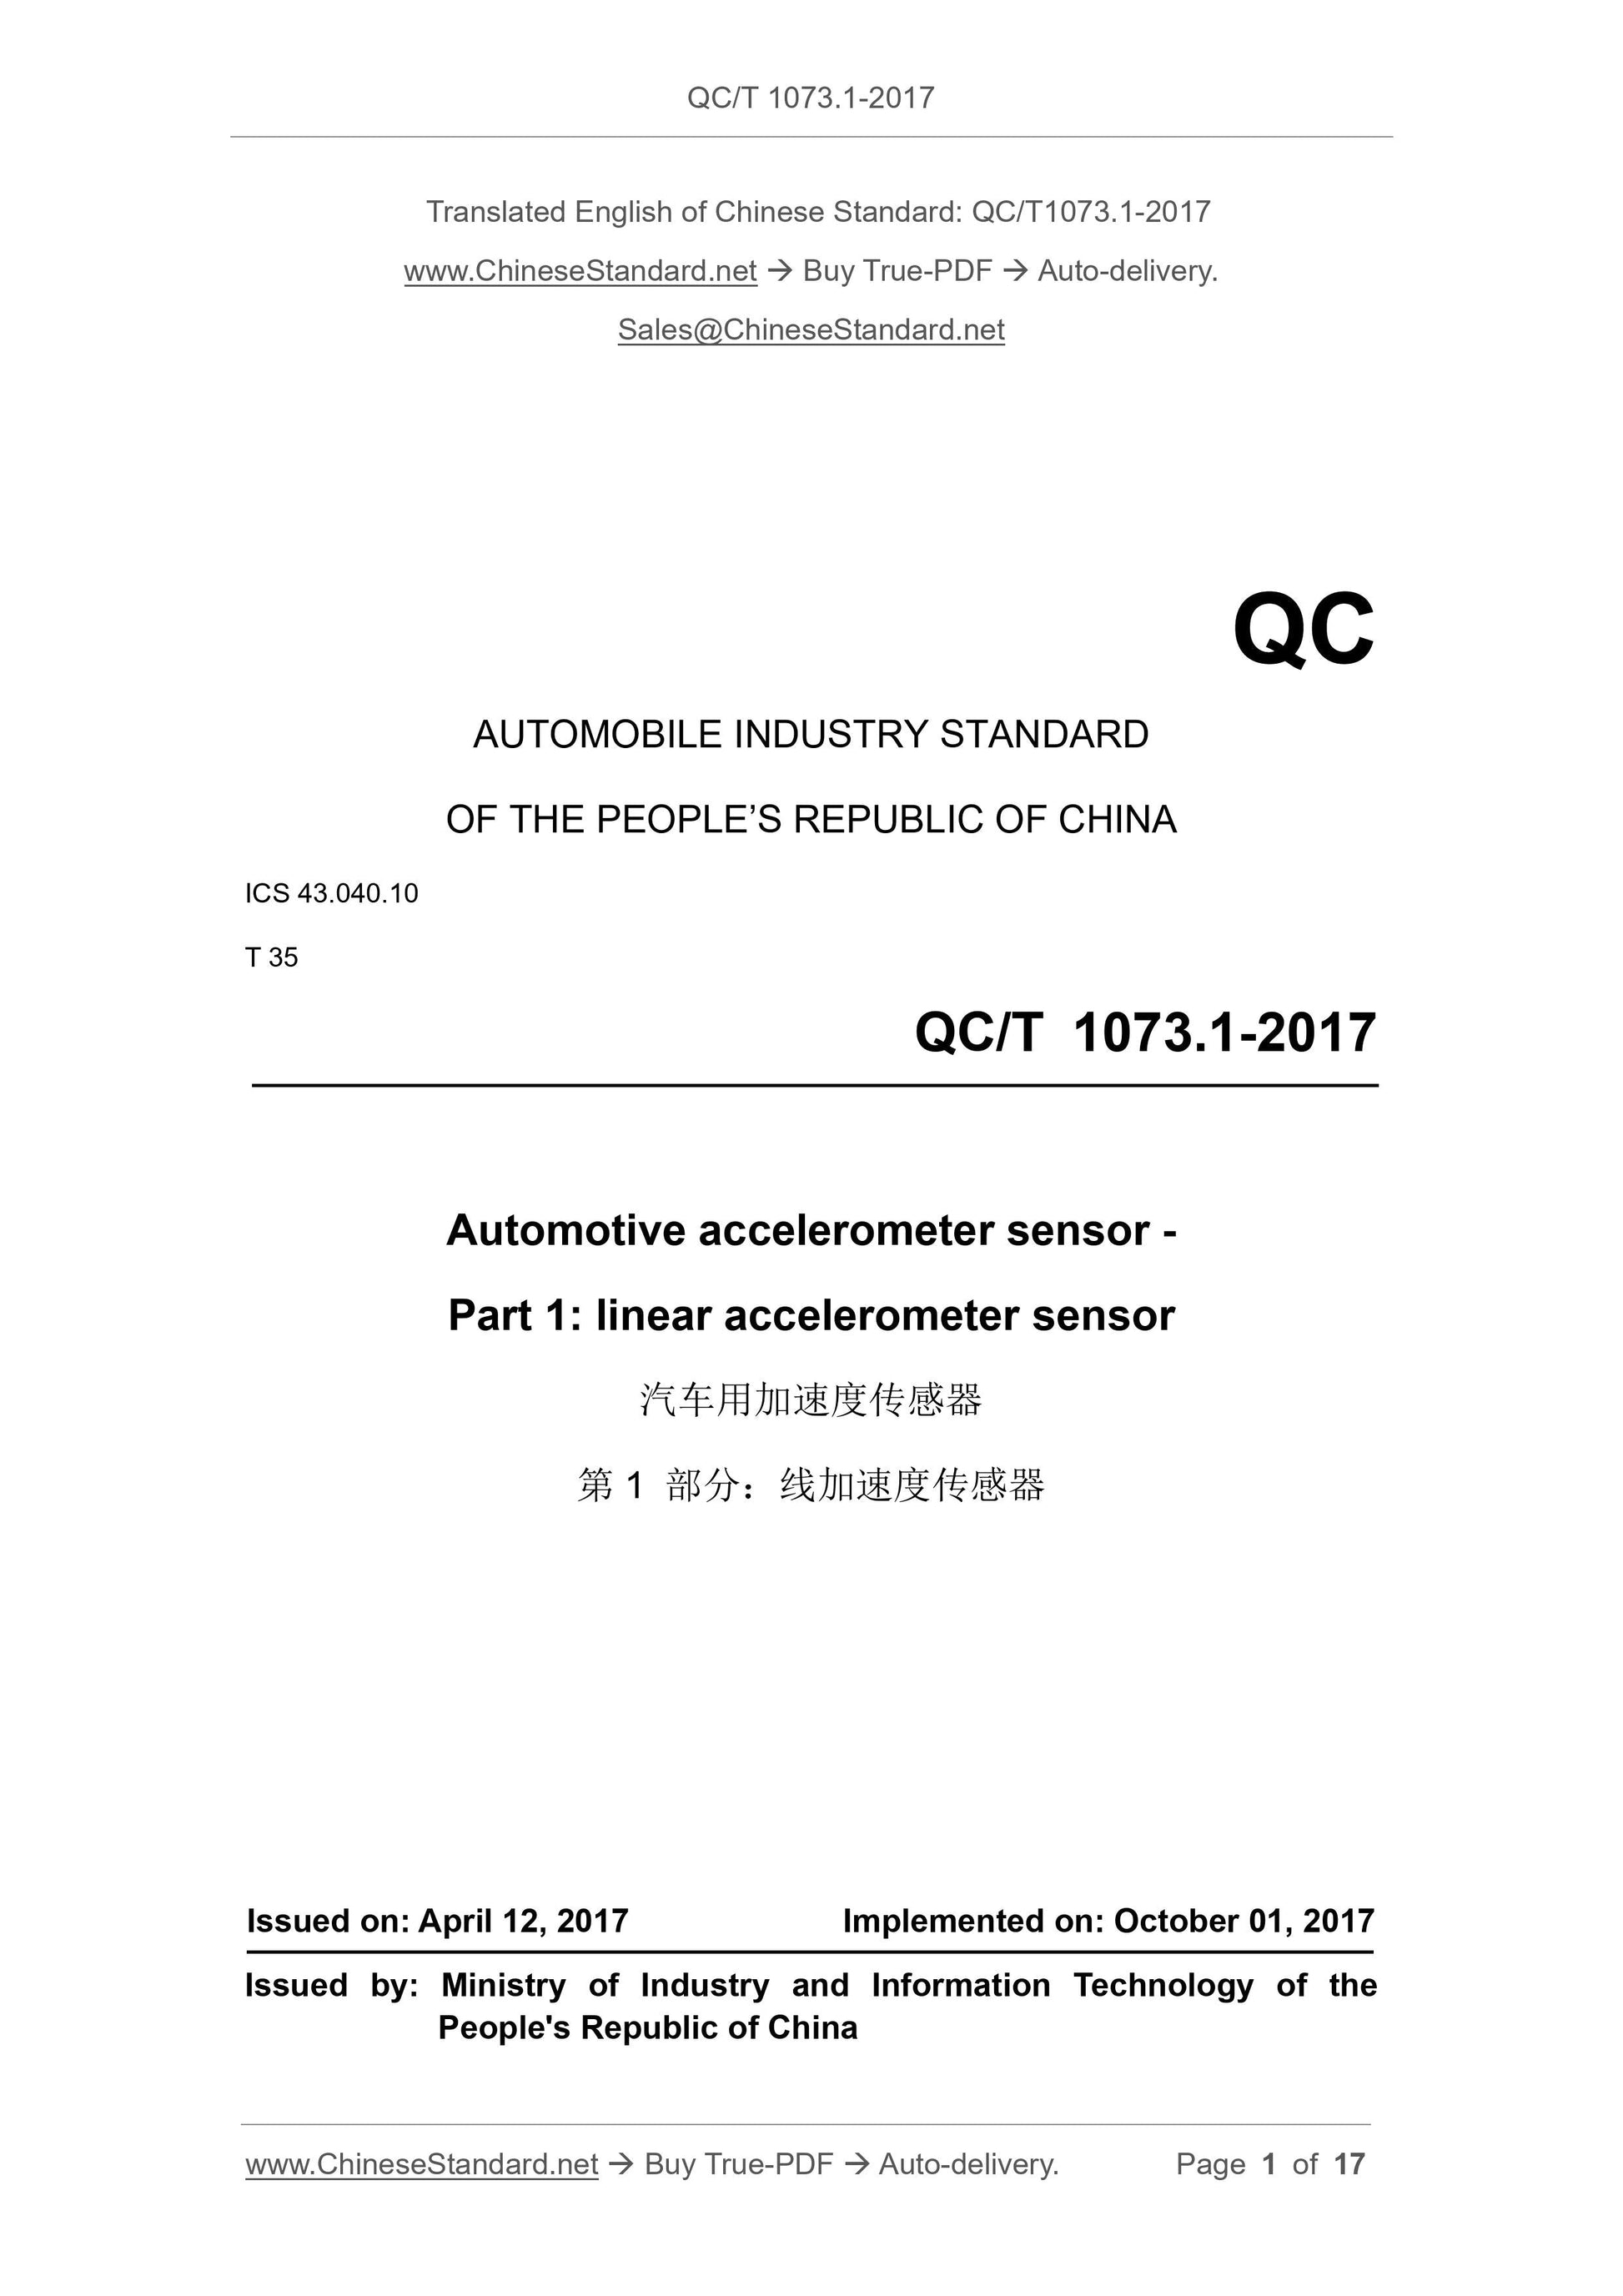 QC/T 1073.1-2017 Page 1